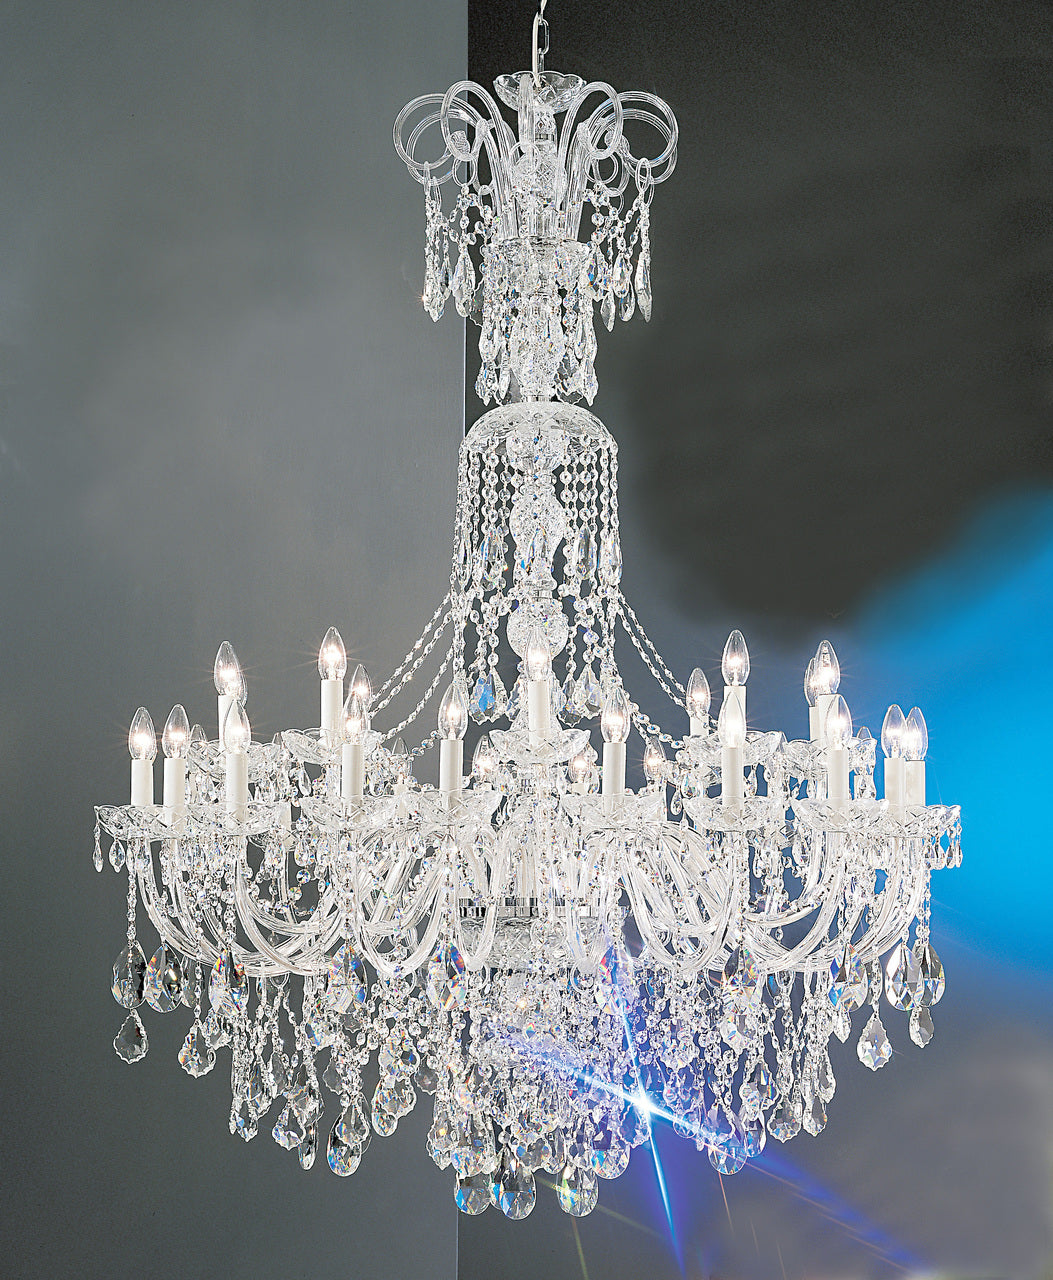 Classic Lighting 8264 CH C Bohemia Crystal/Glass Chandelier in Chrome (Imported from Italy)